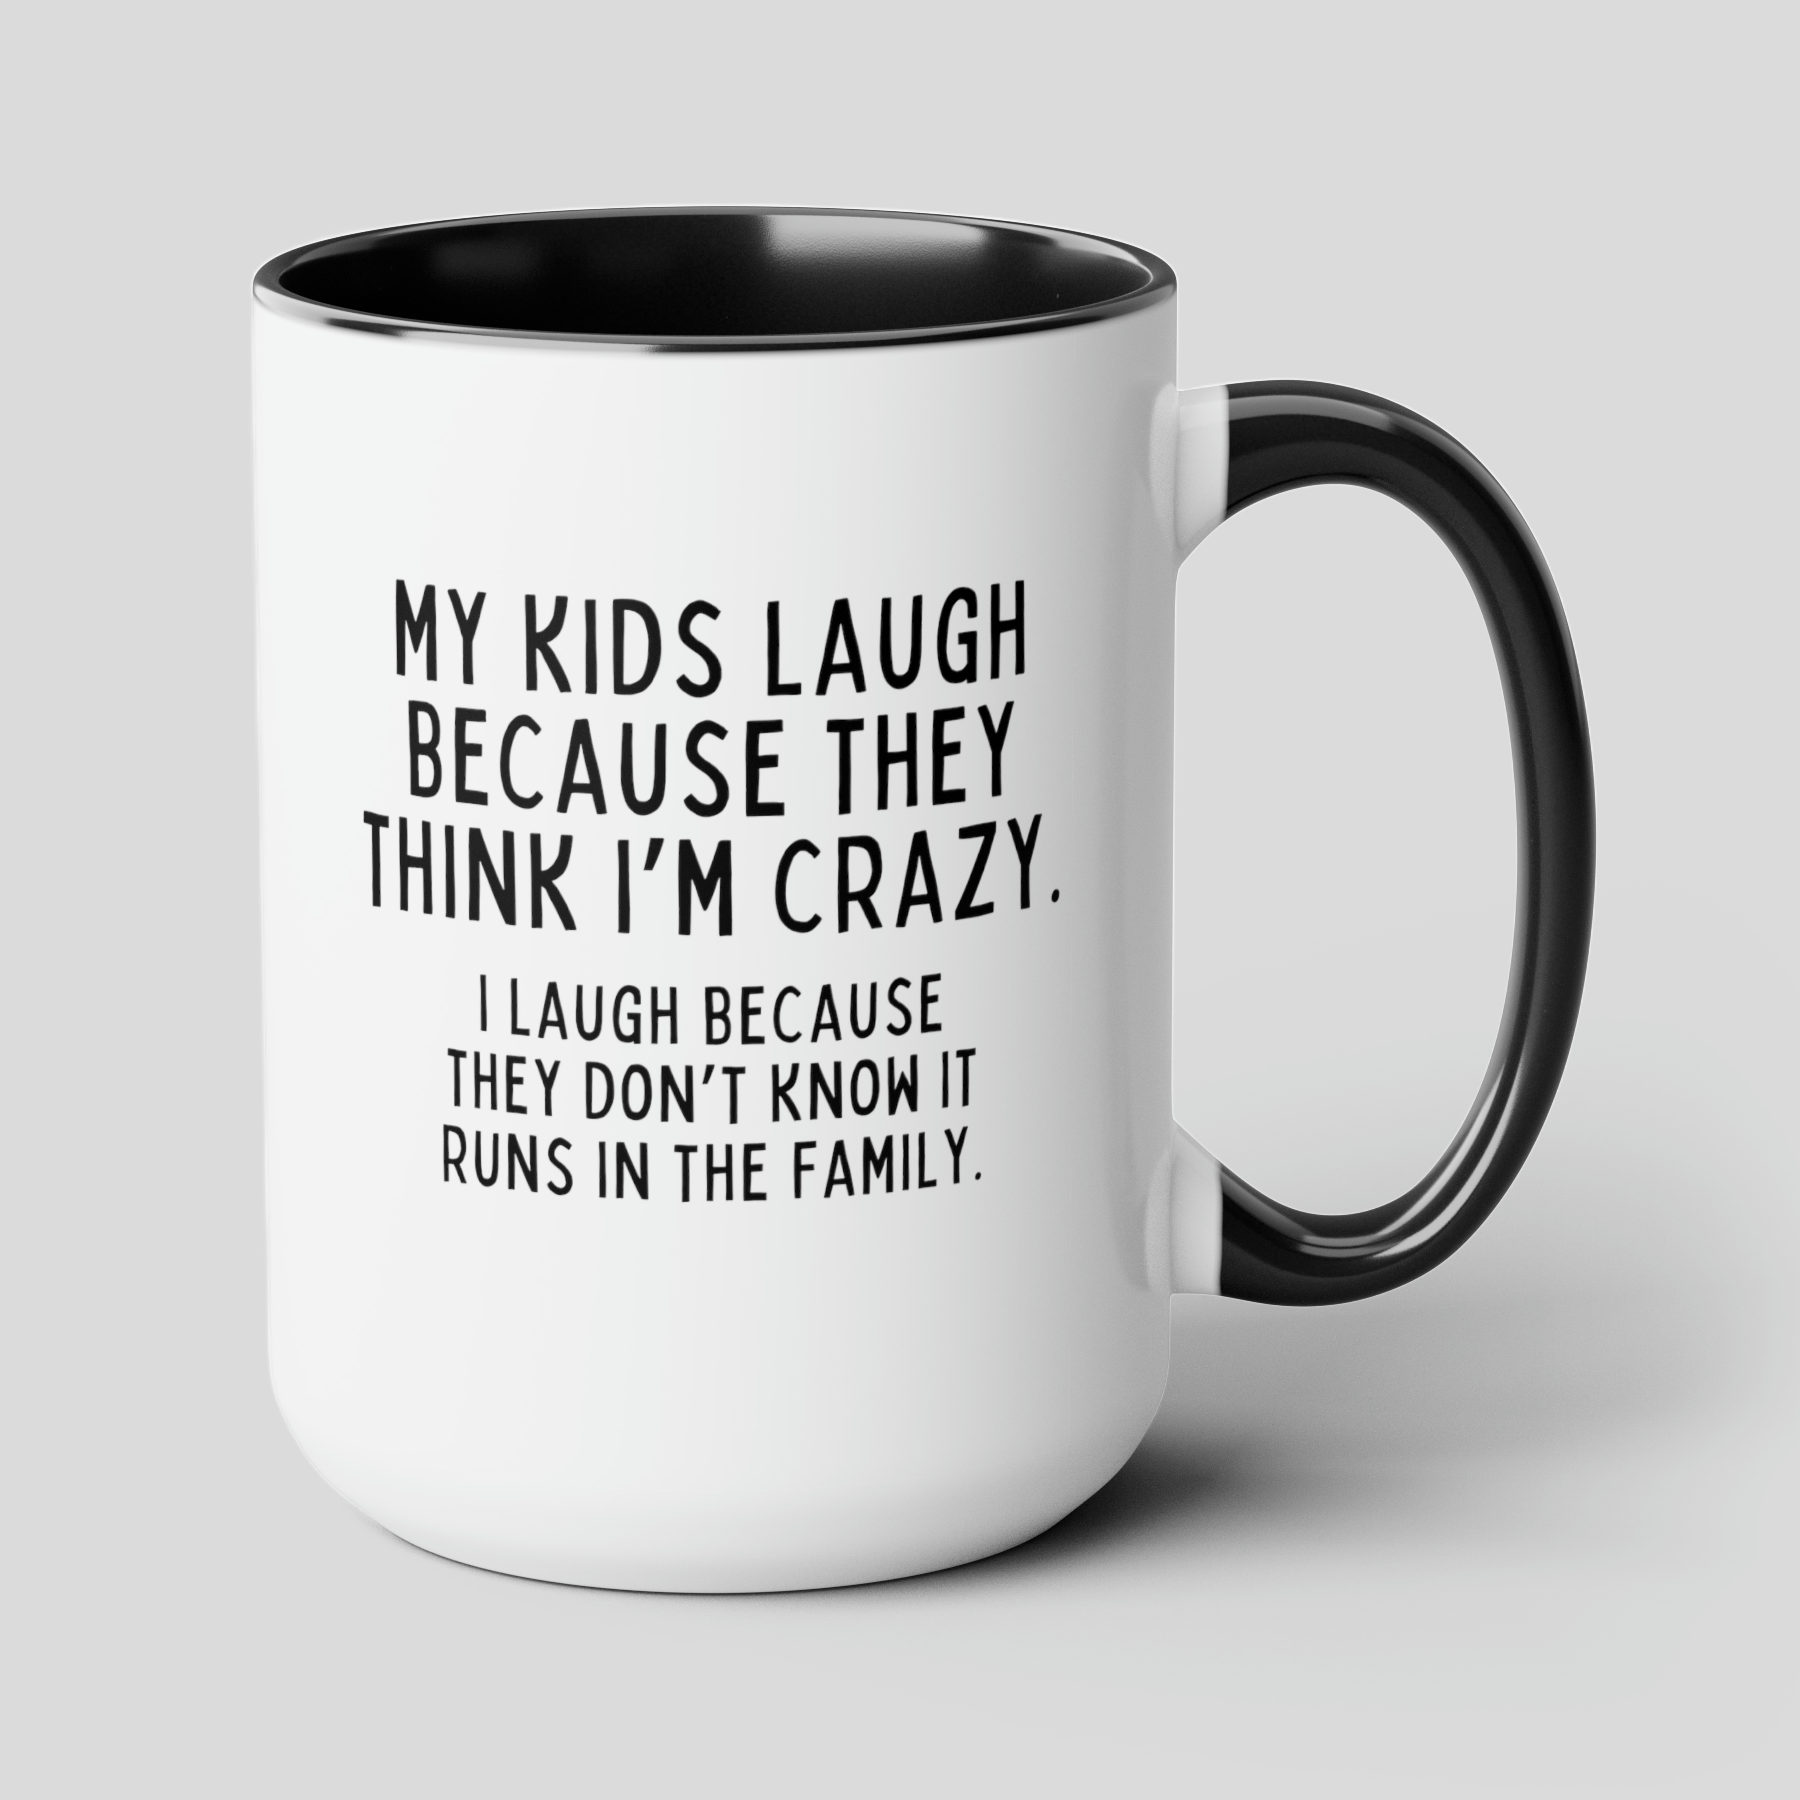 My Kids Laugh Because They Think Im Crazy I Laugh Because They Dont Know It Runs In The Family 15oz white with black accent funny large coffee mug gift dad mom birthday waveywares wavey wares wavywares wavy wares cover